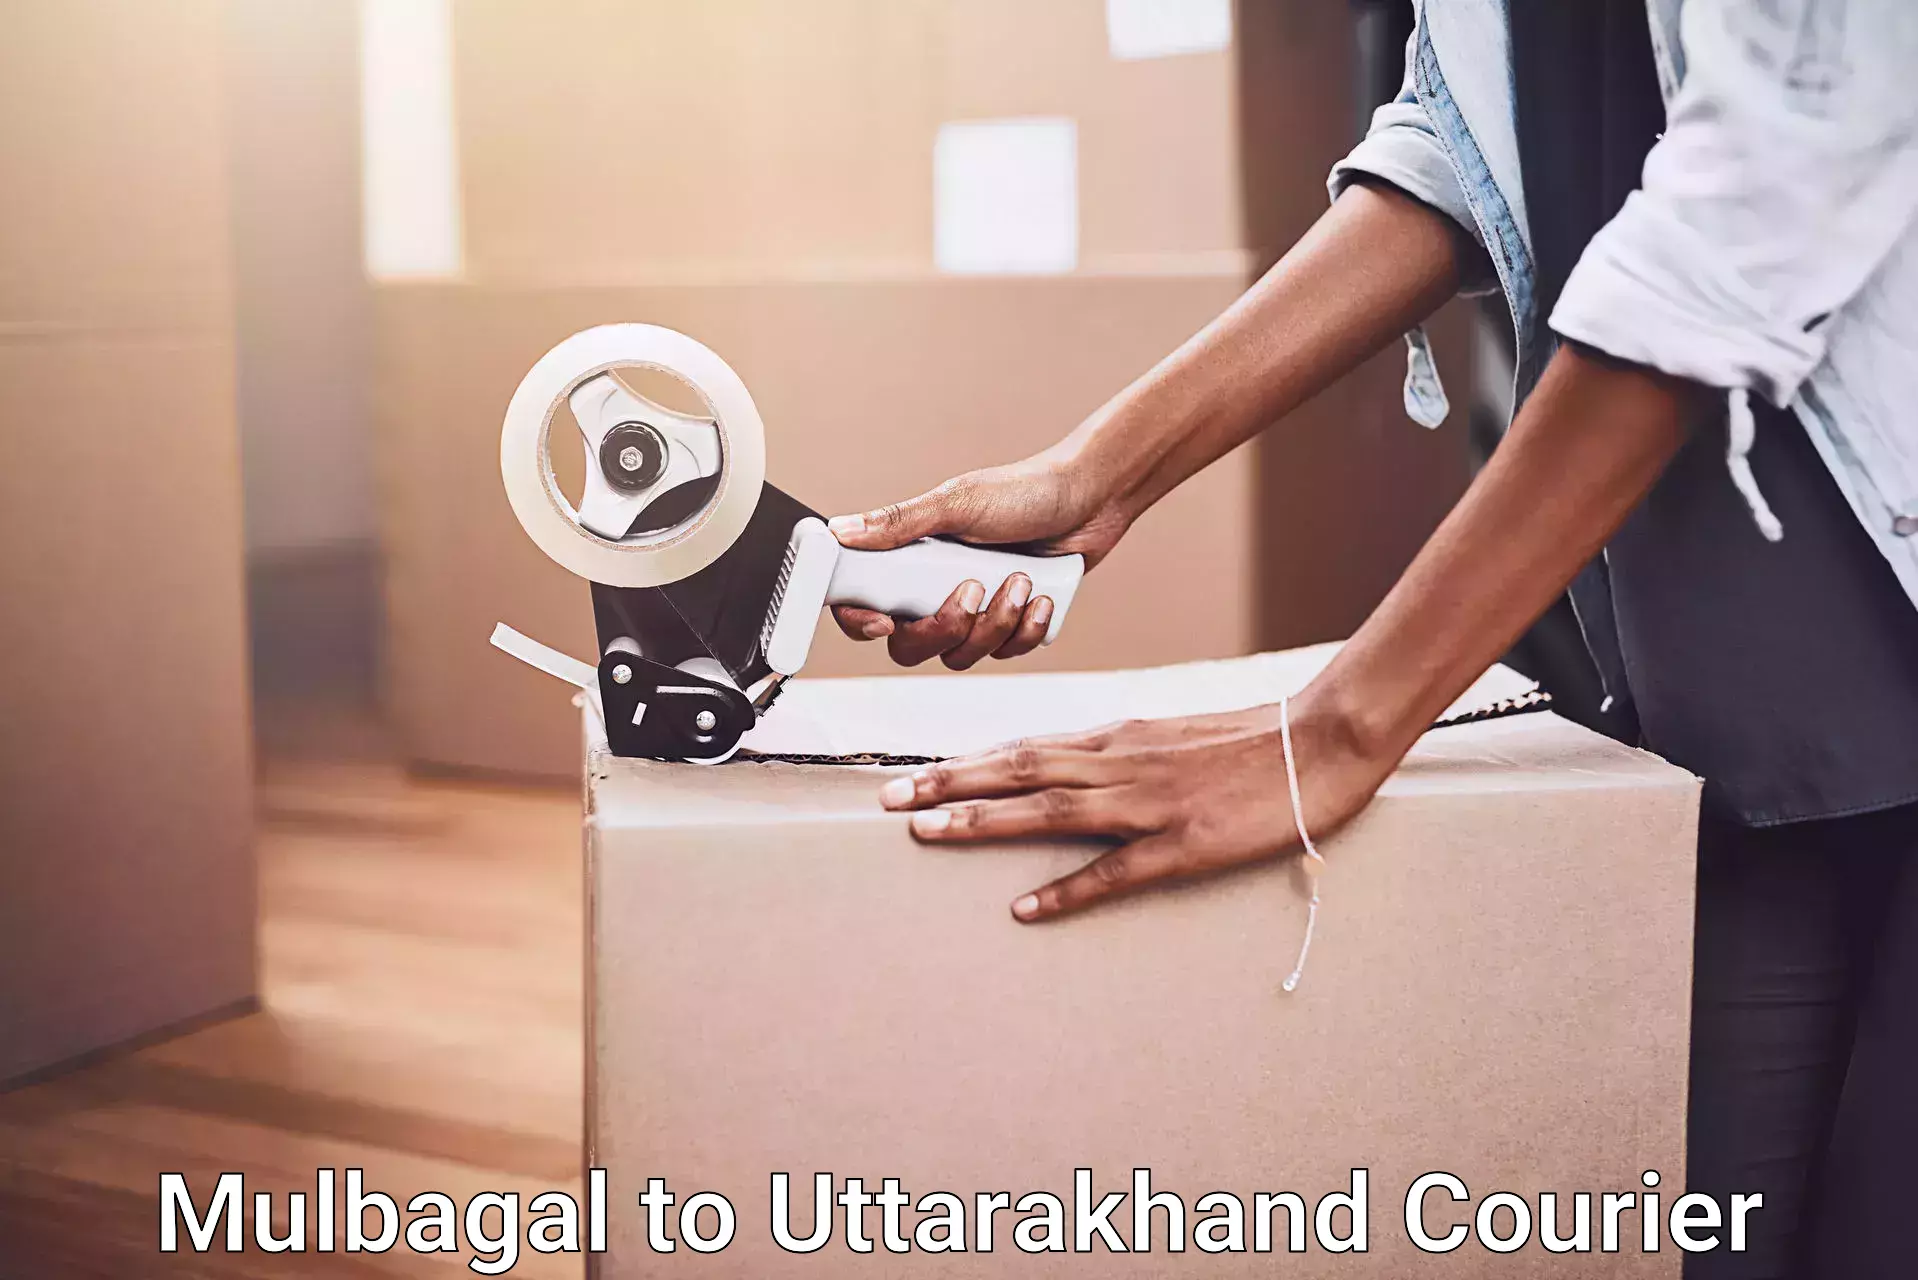 Home relocation experts Mulbagal to Uttarakhand